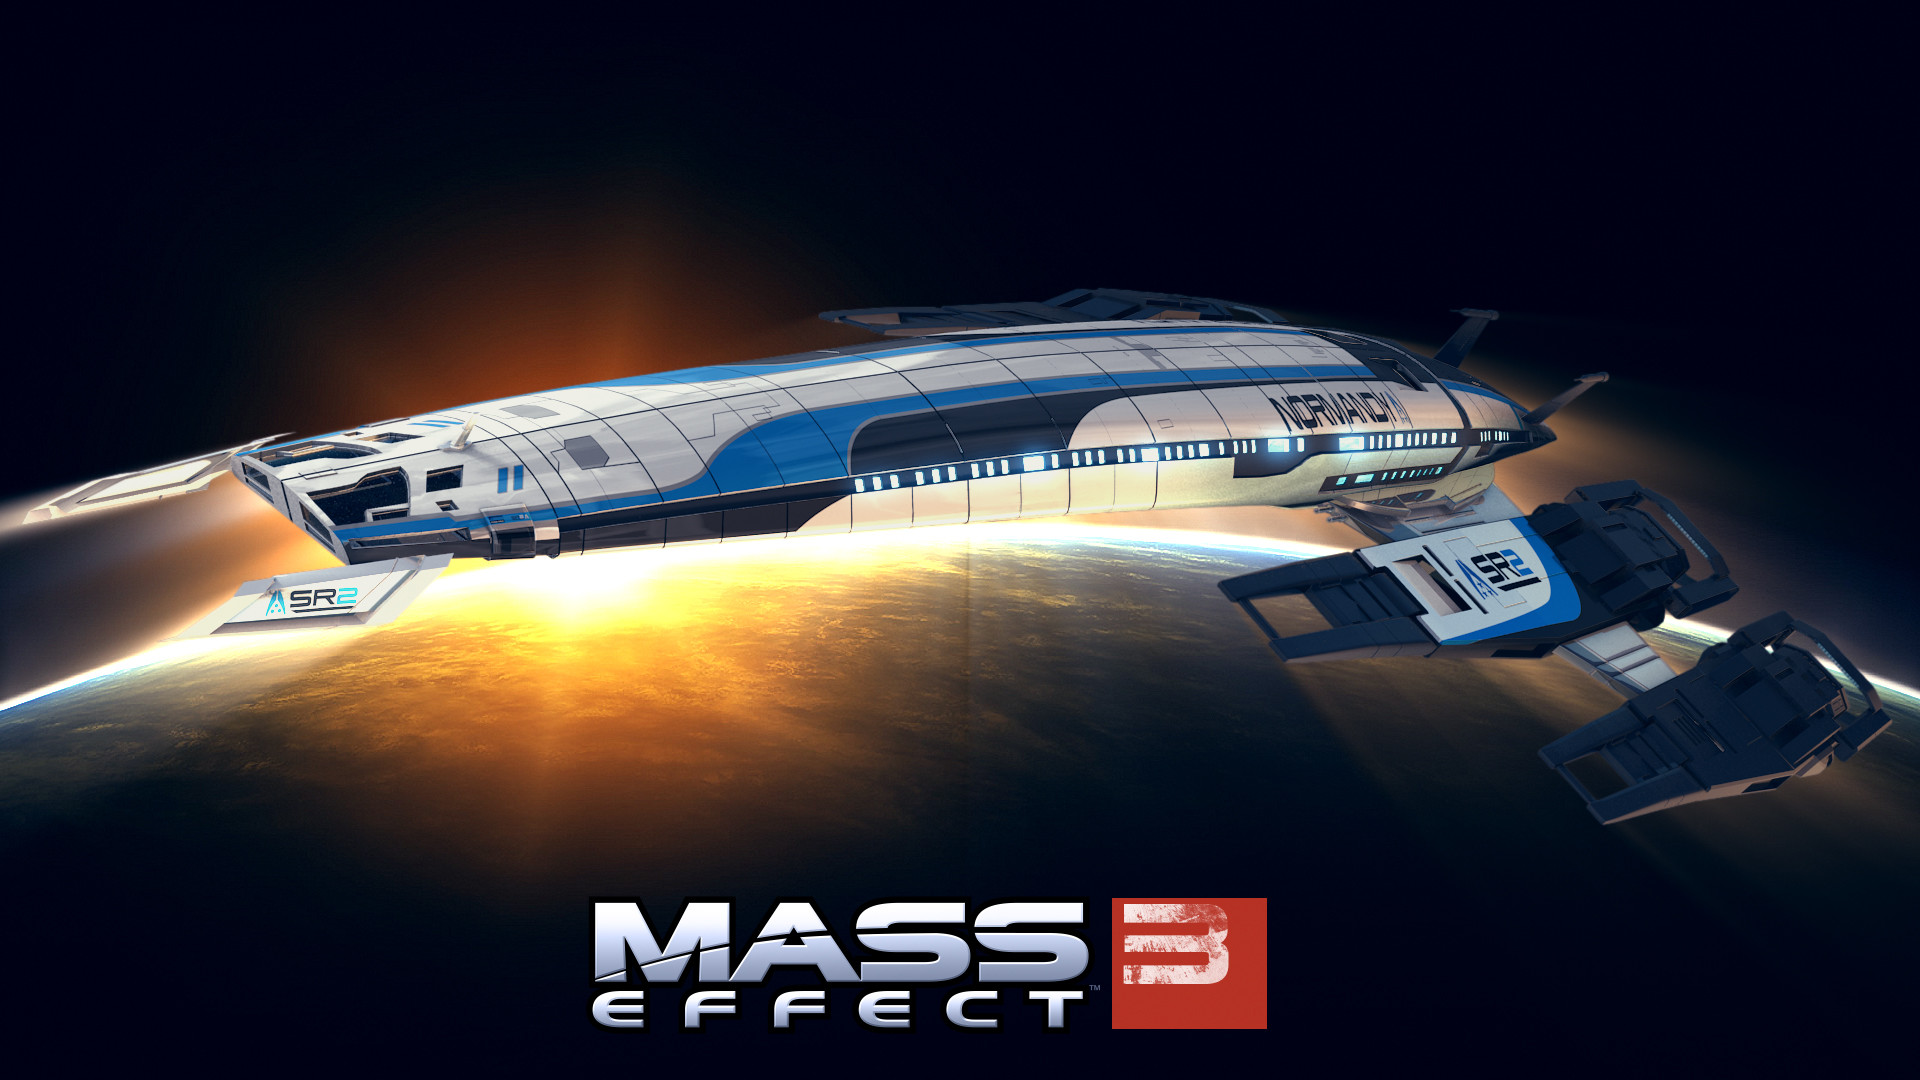 1920x1080 Pin Normandy Sr 2 Mass Effect Space Ship Picture 